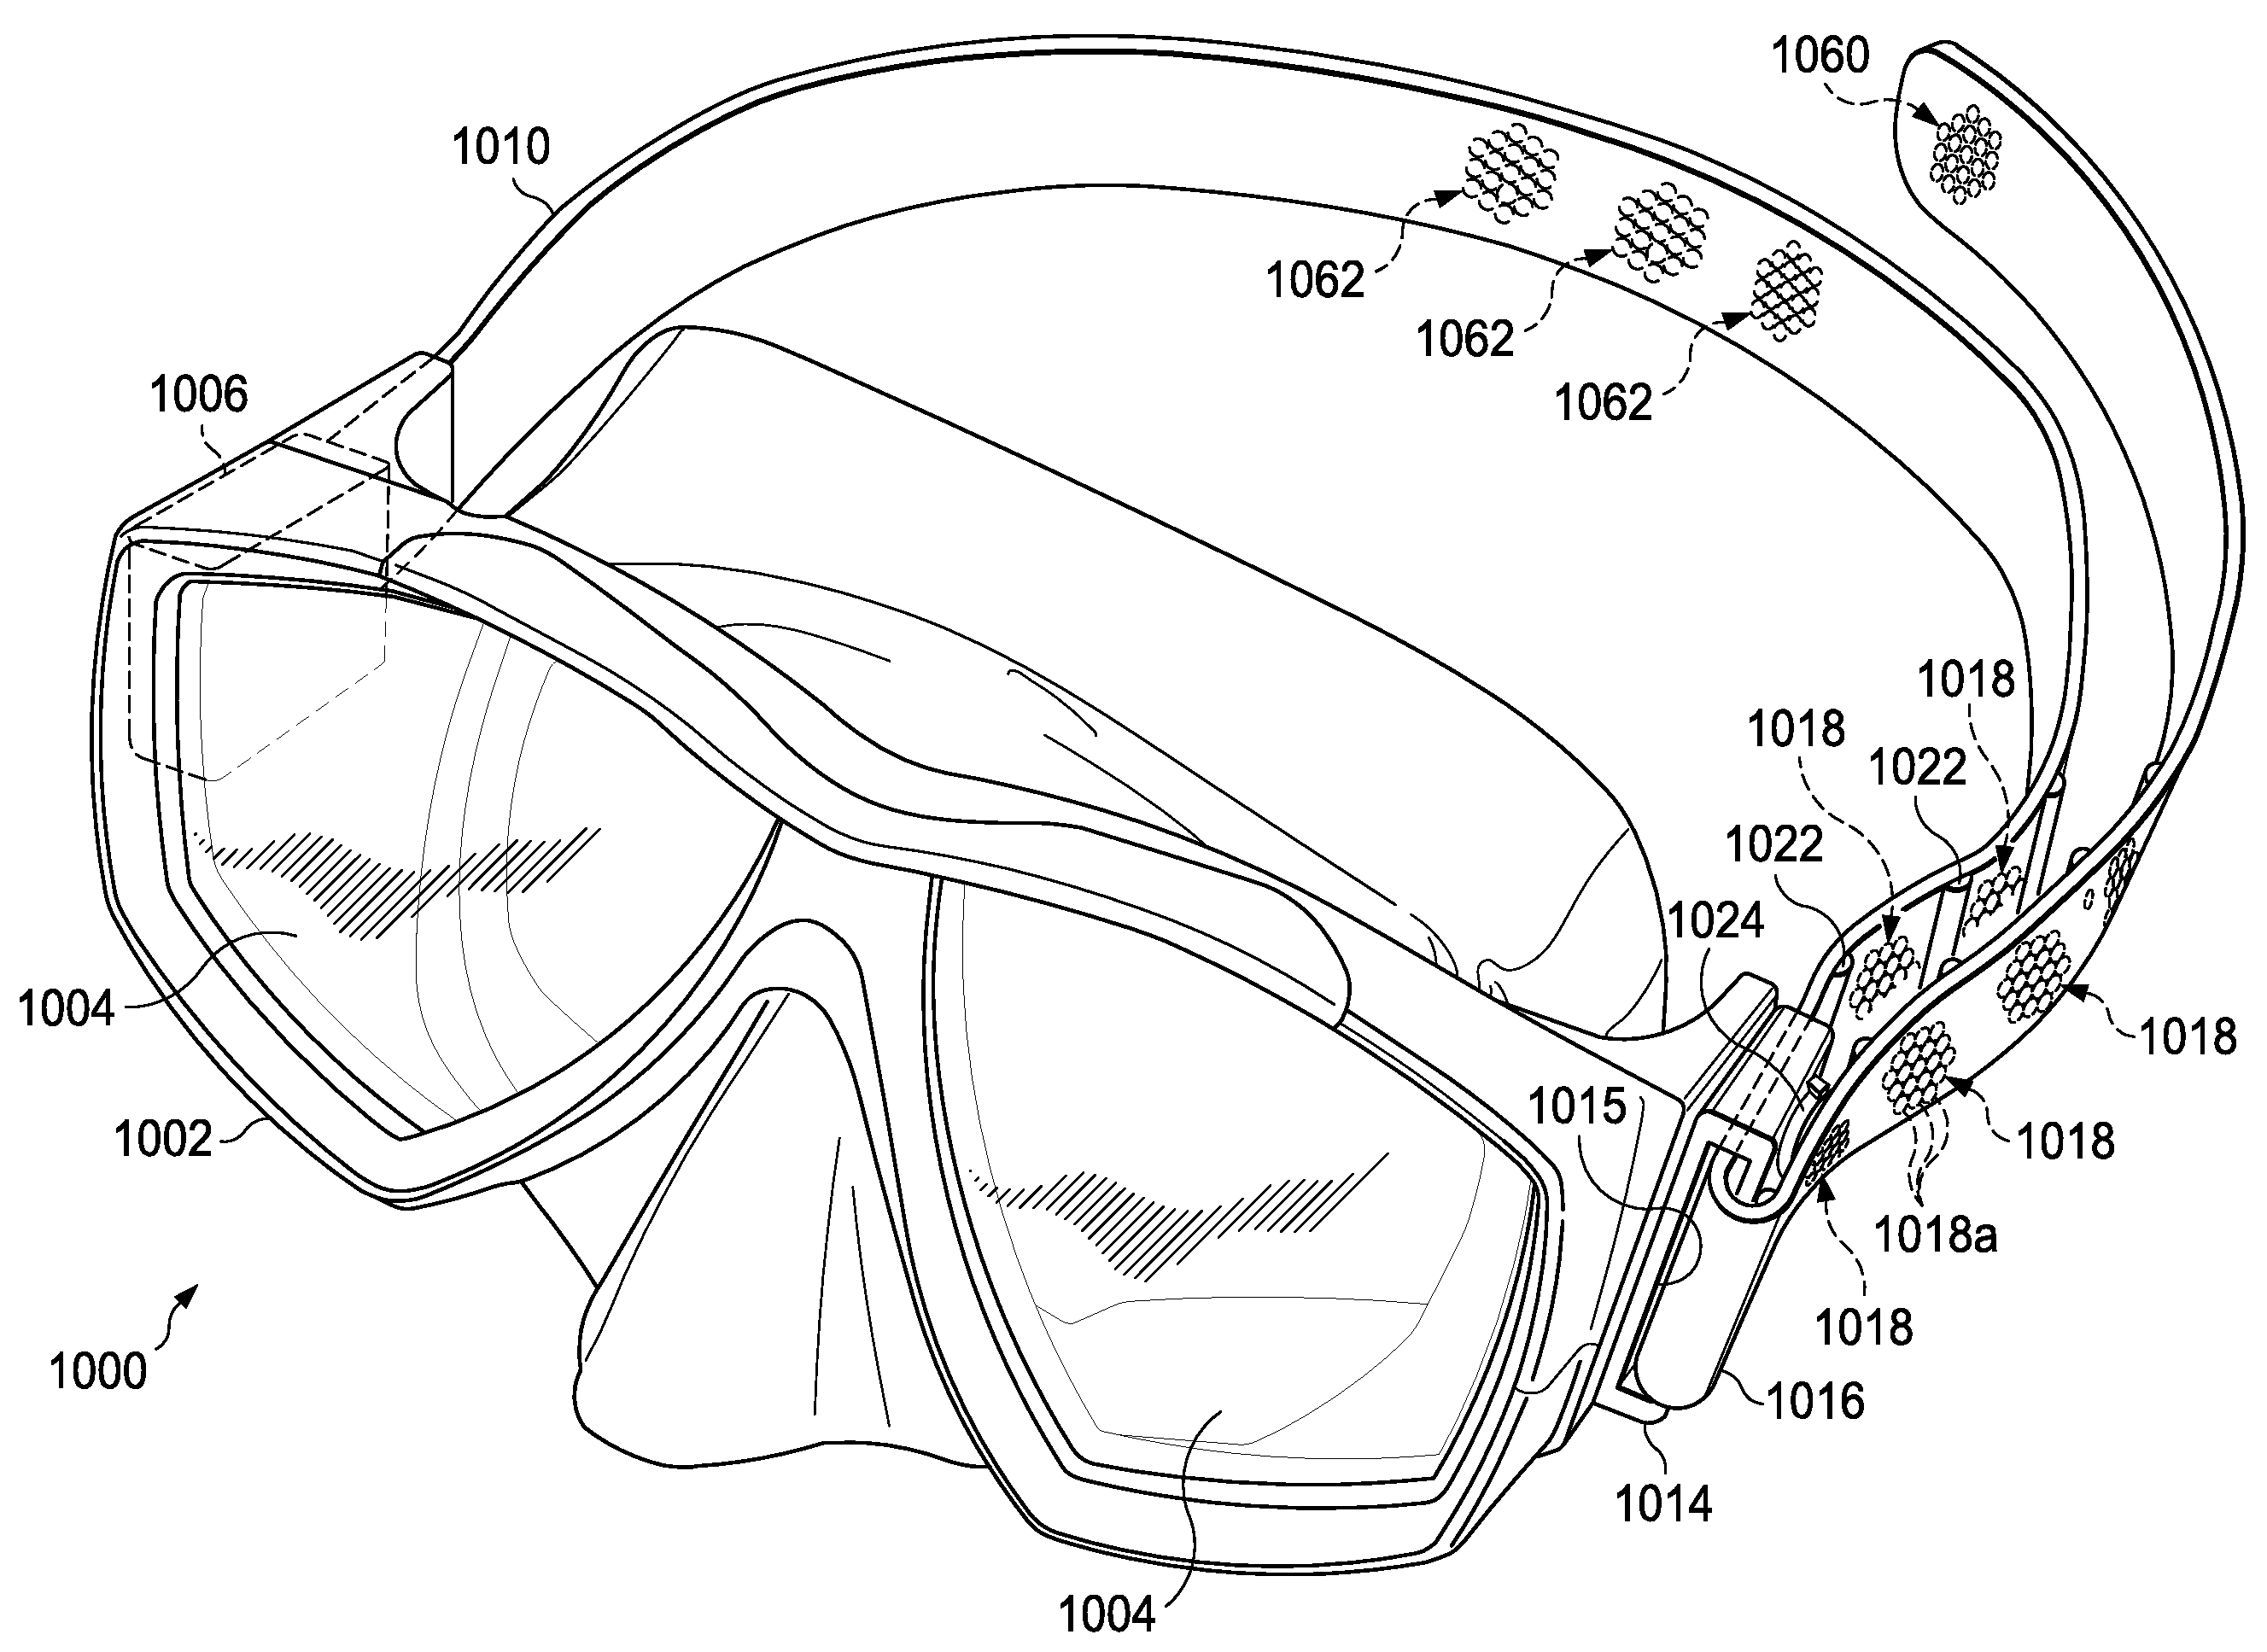 Correlated Magnetic Mask and Method for Using the Correlated Magnetic Mask